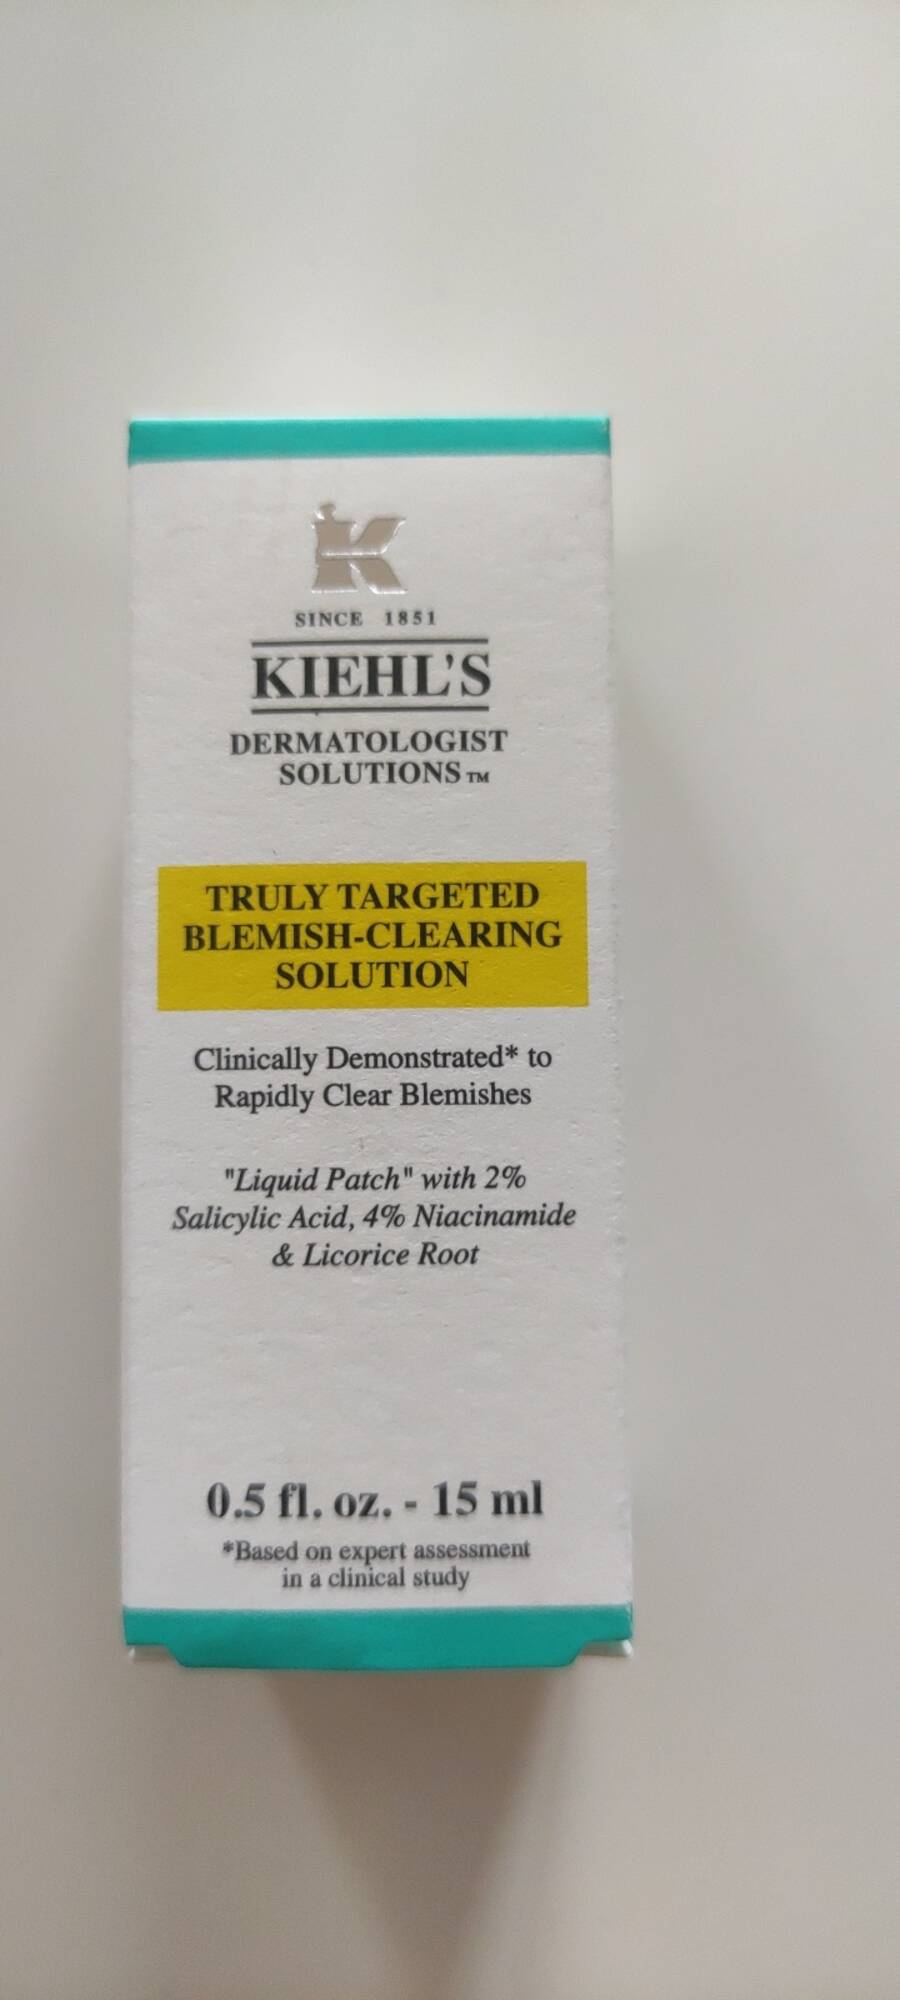 KIEHL'S - Truly targeted blemish clearing solution 